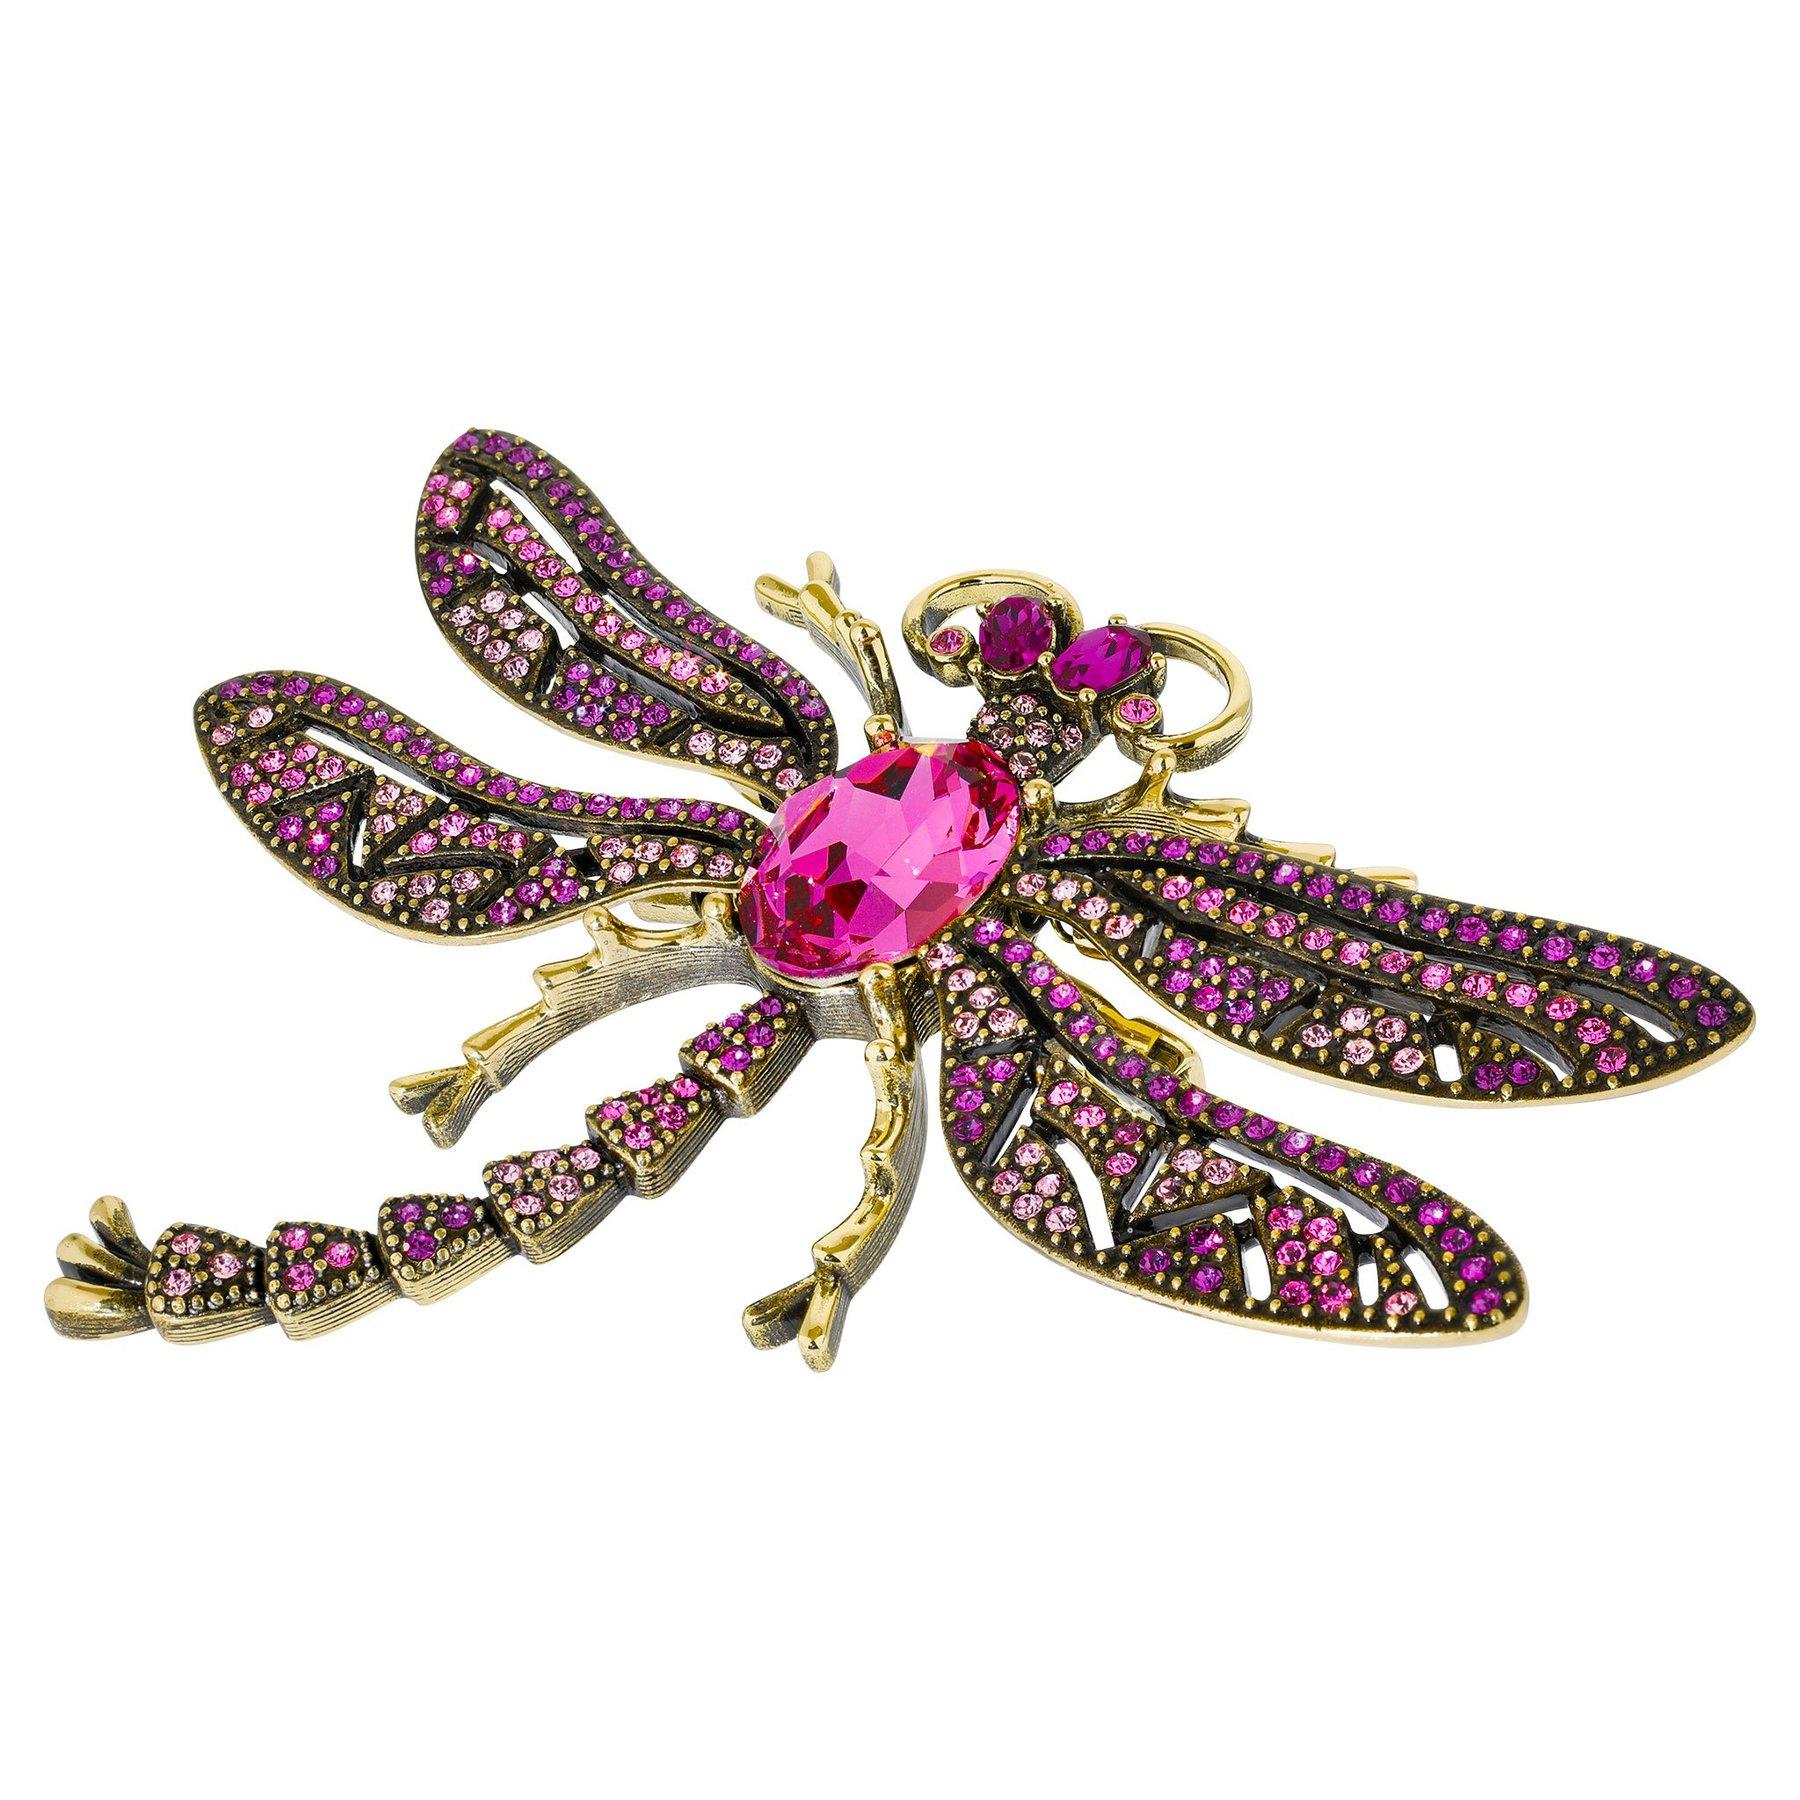 Women's or Men's Heidi Daus Trembling Brilliance Crystal Accented Dragonfly Pin Fushia Pink Multi For Sale